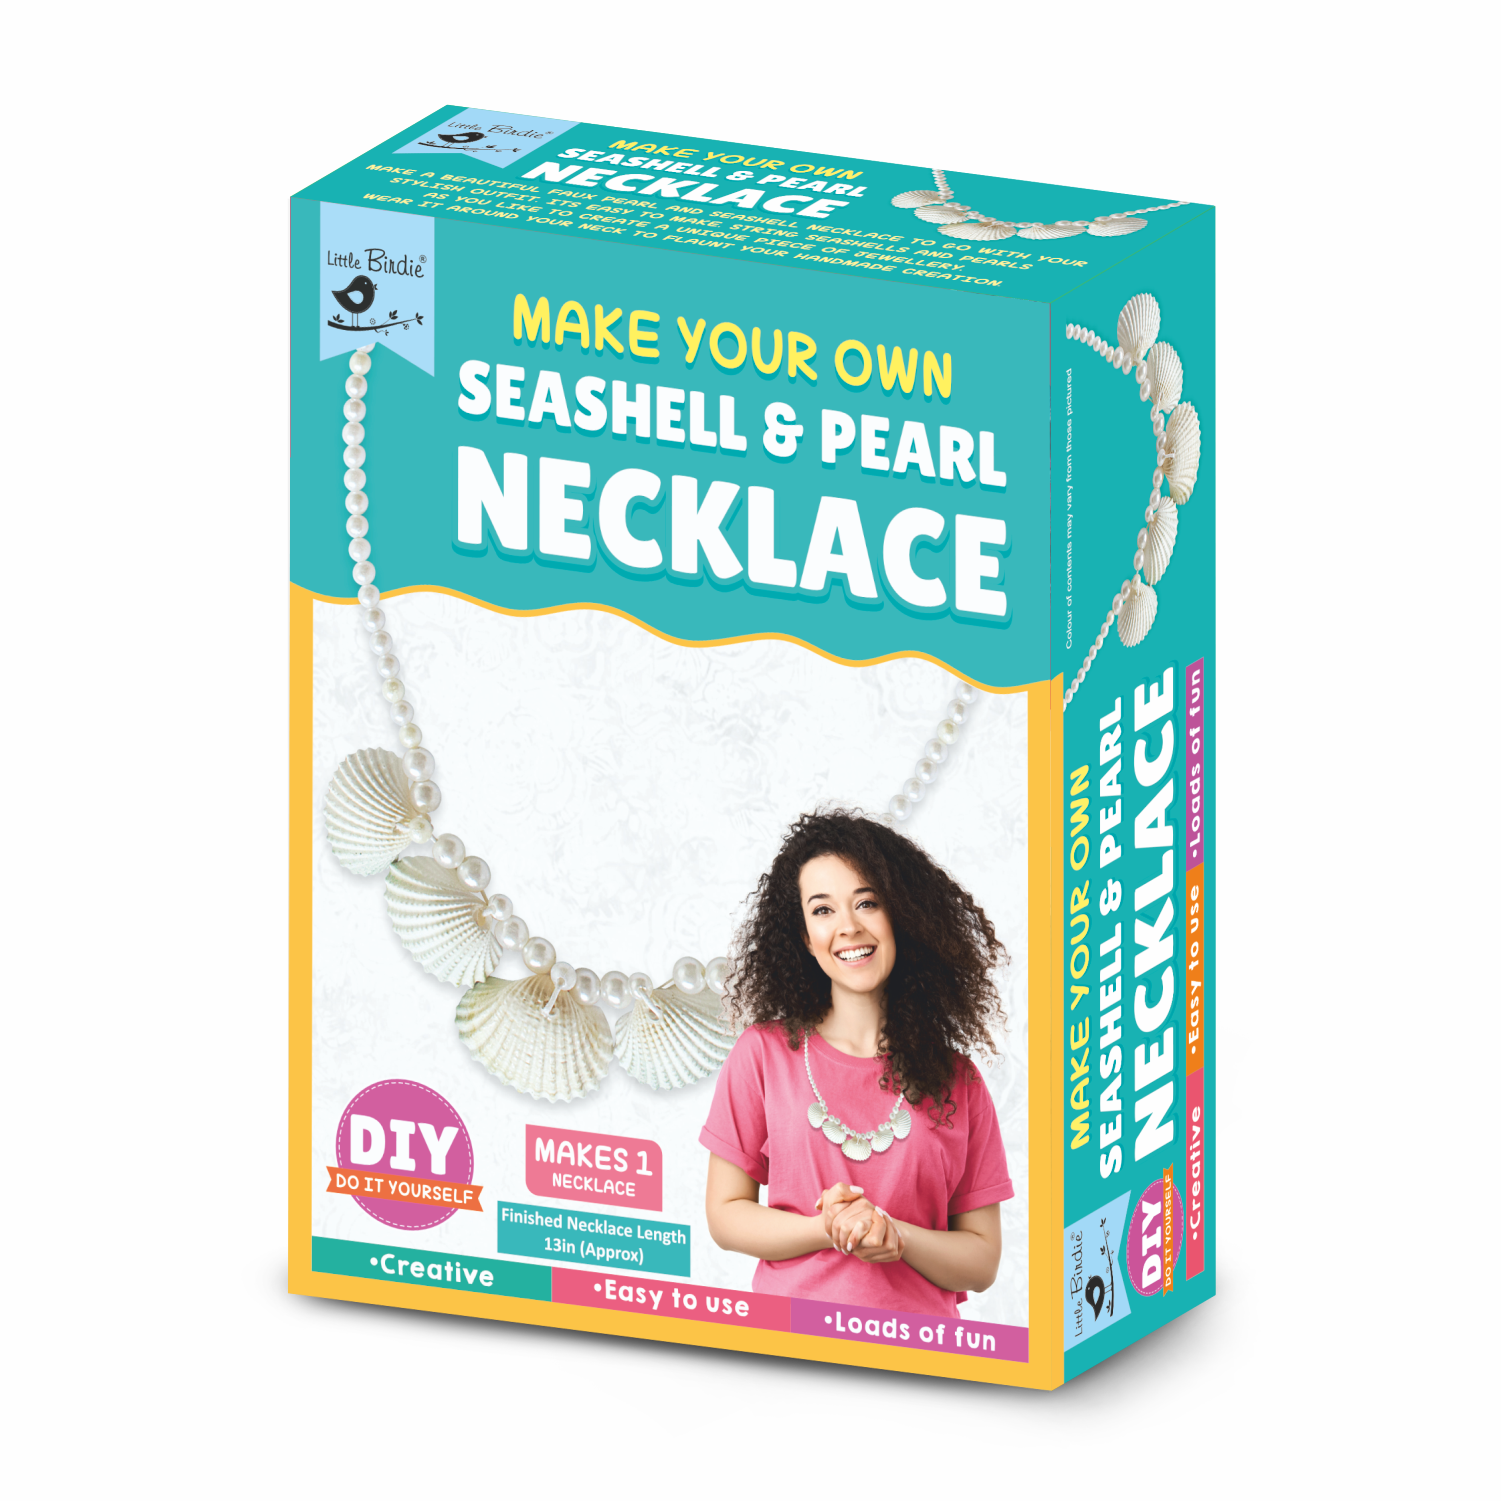 Diy Your Own Seashell & Pearl Necklace Kit 1 Box Lb